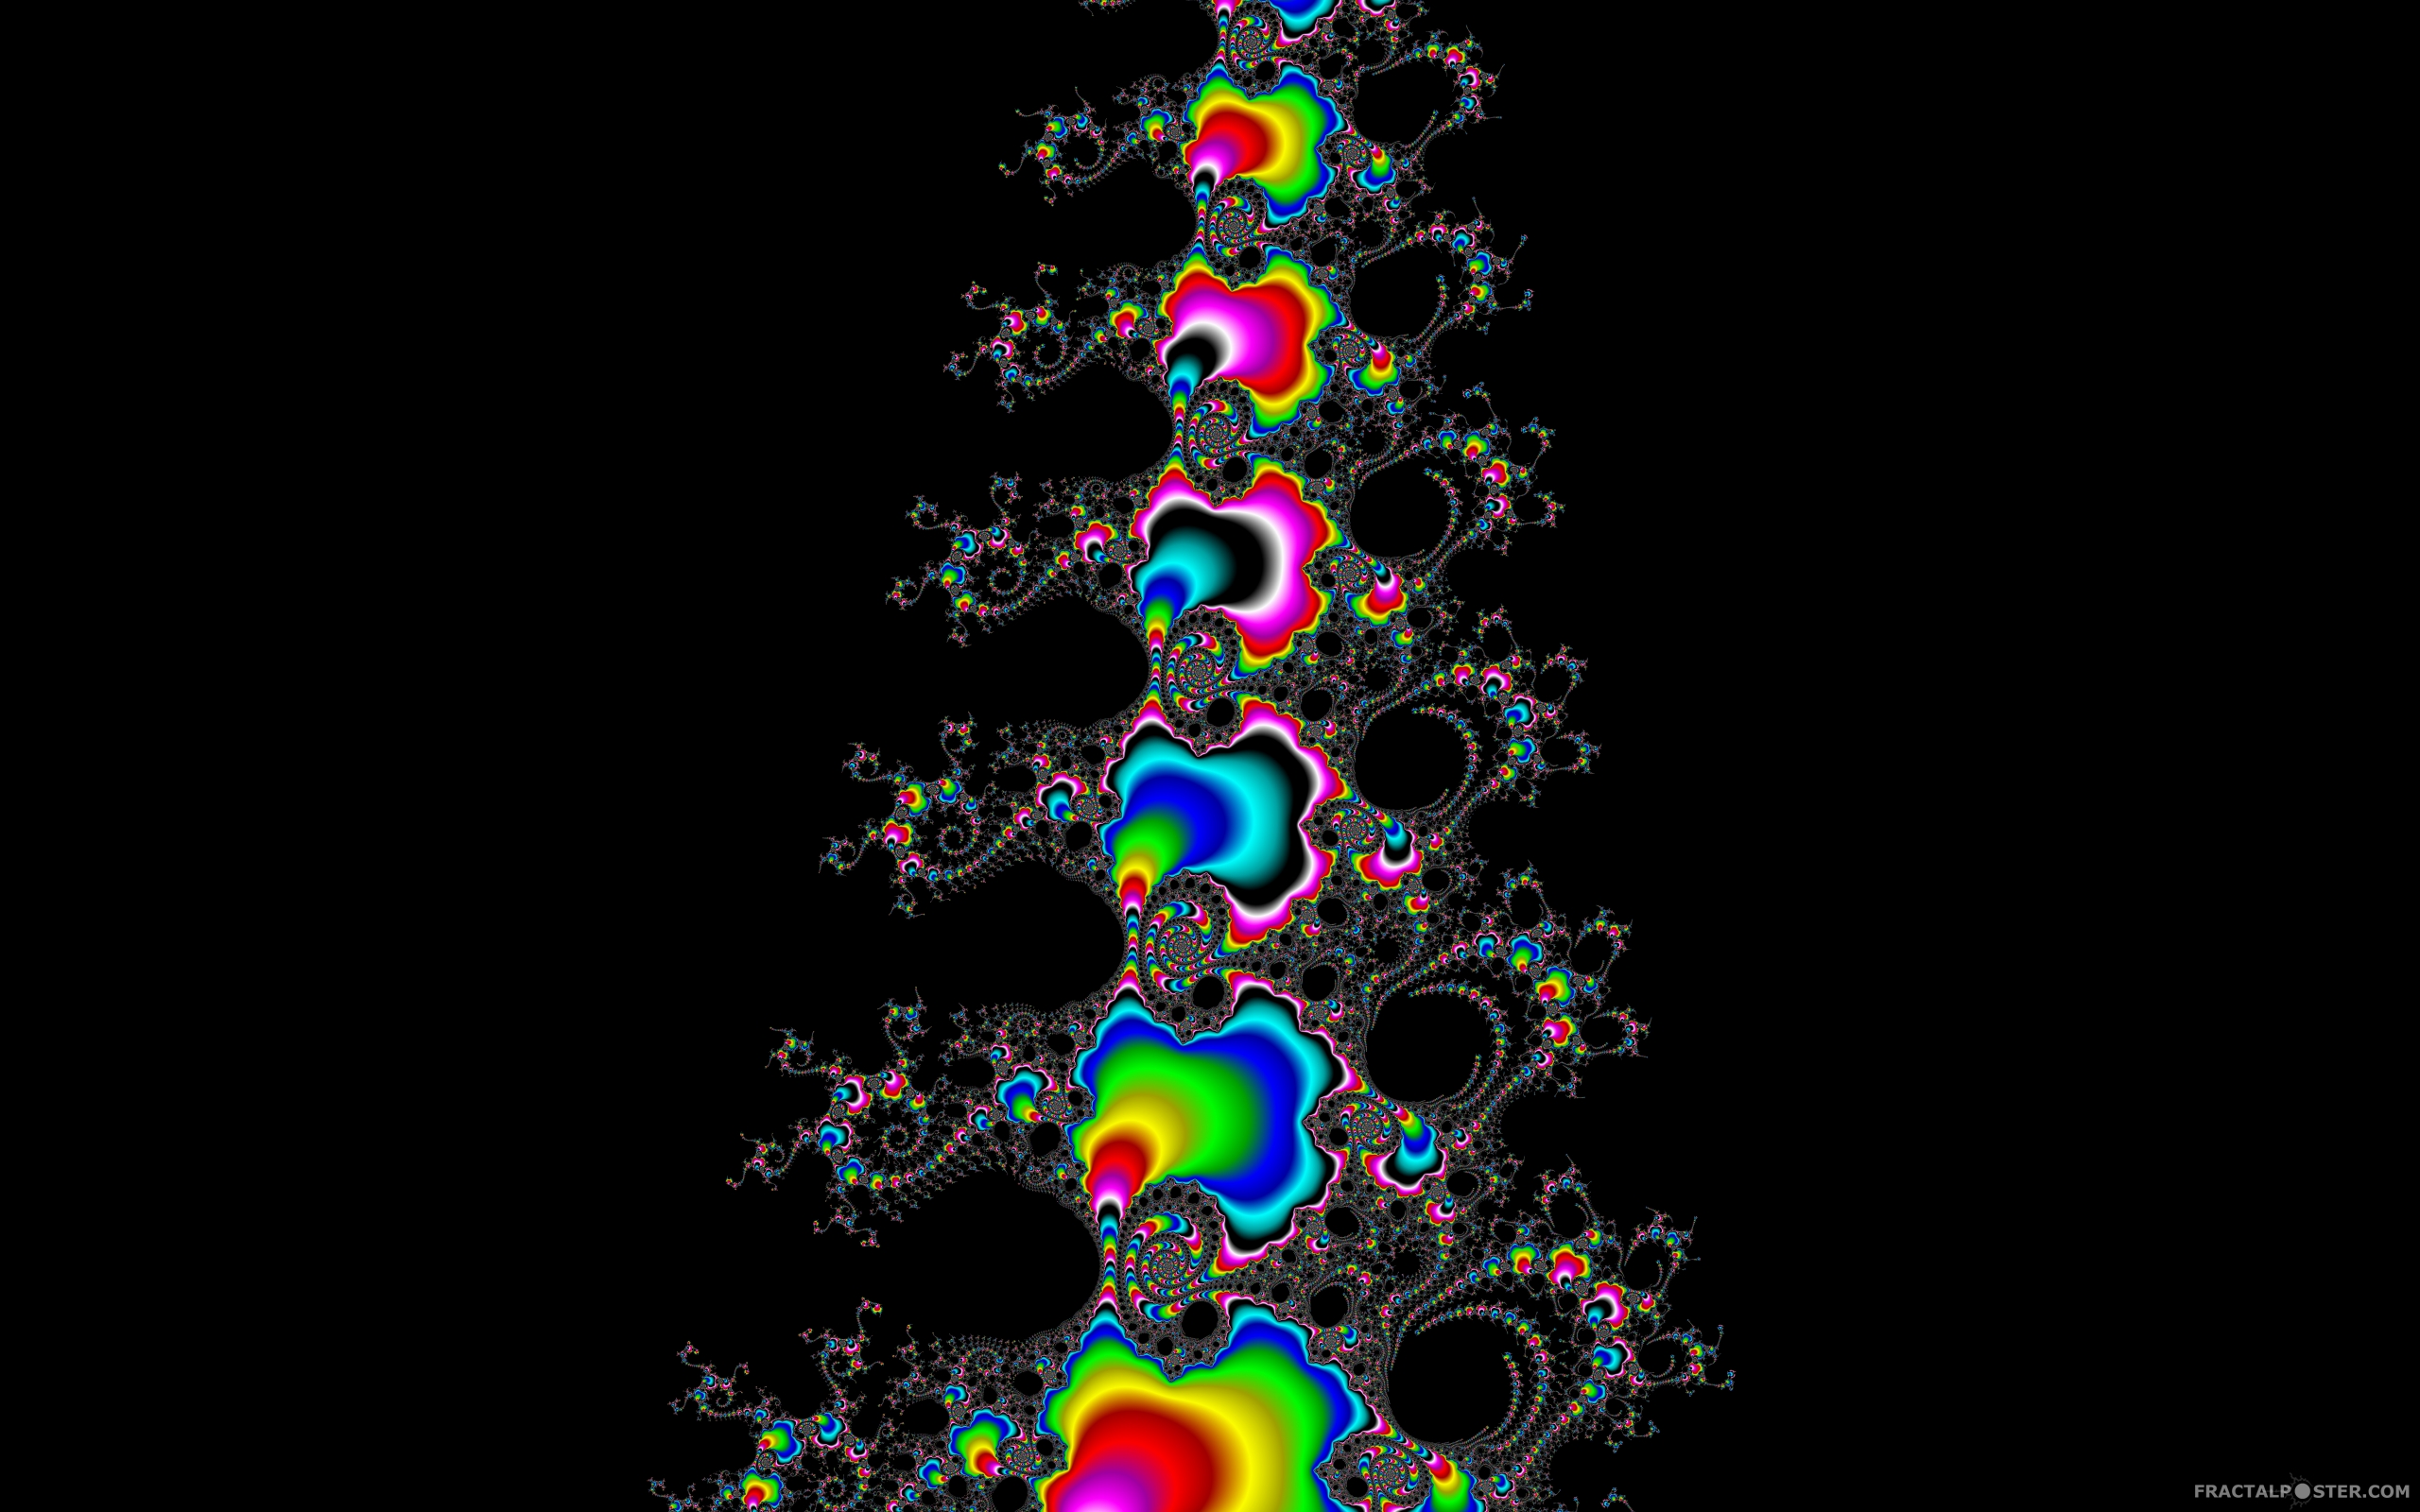 Christmastree Fractal Image By Topping HD Wallpaper Posters